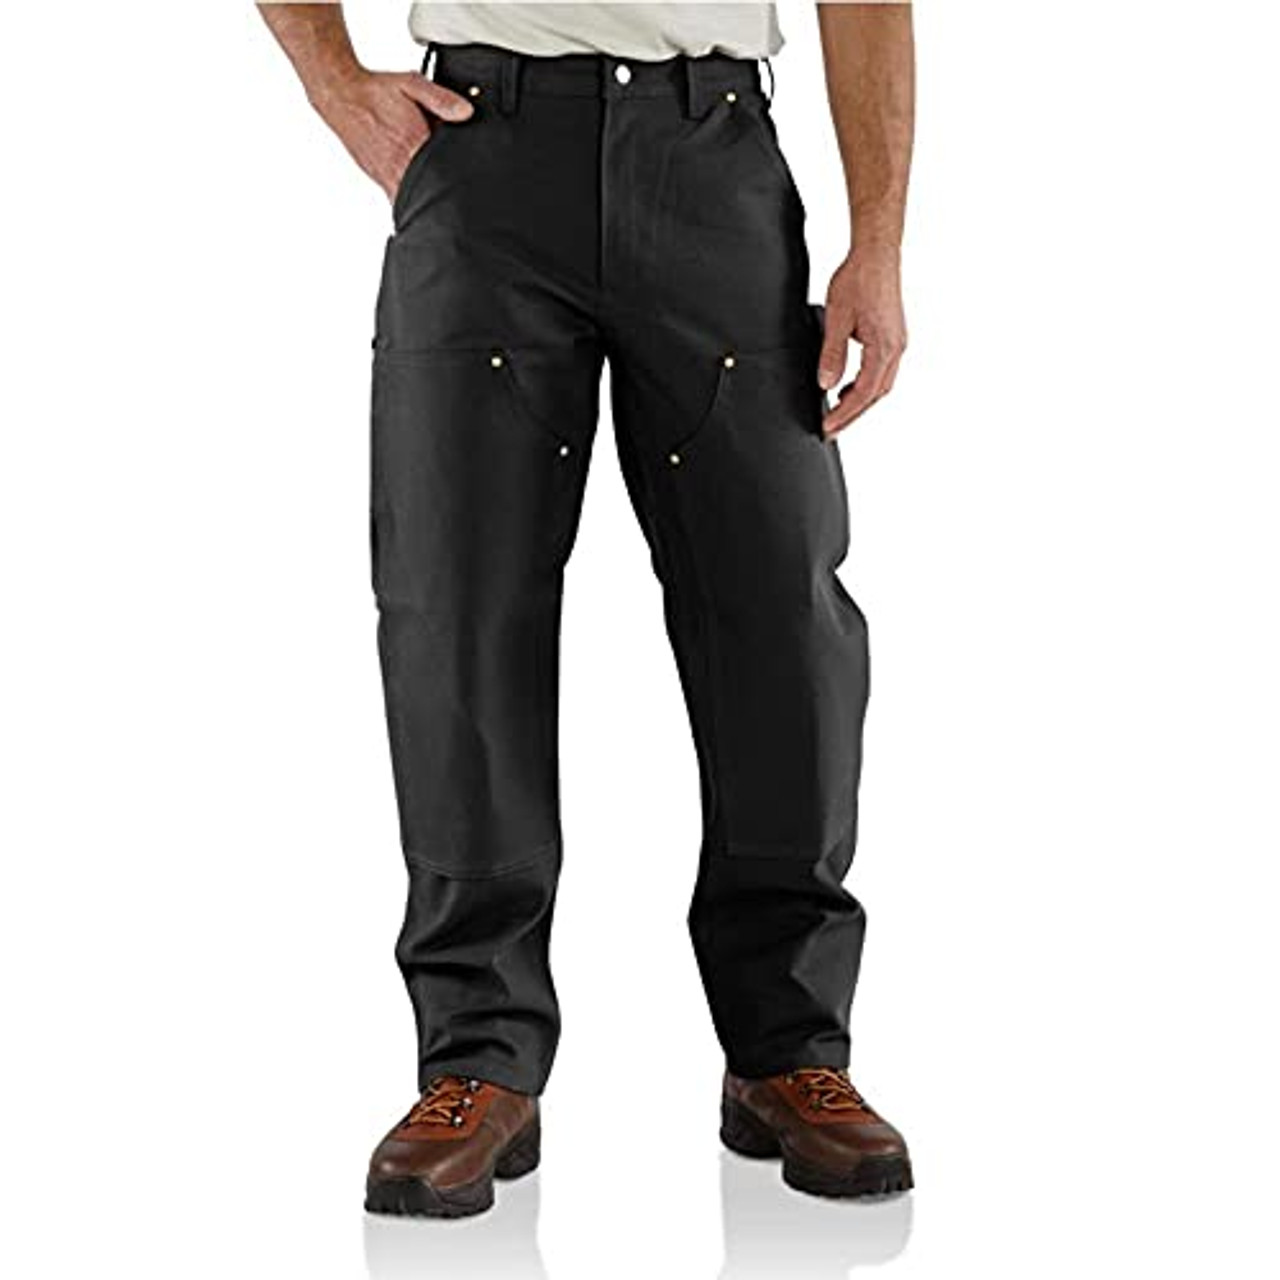 Carhartt Double Front Utility Pant : Hickory